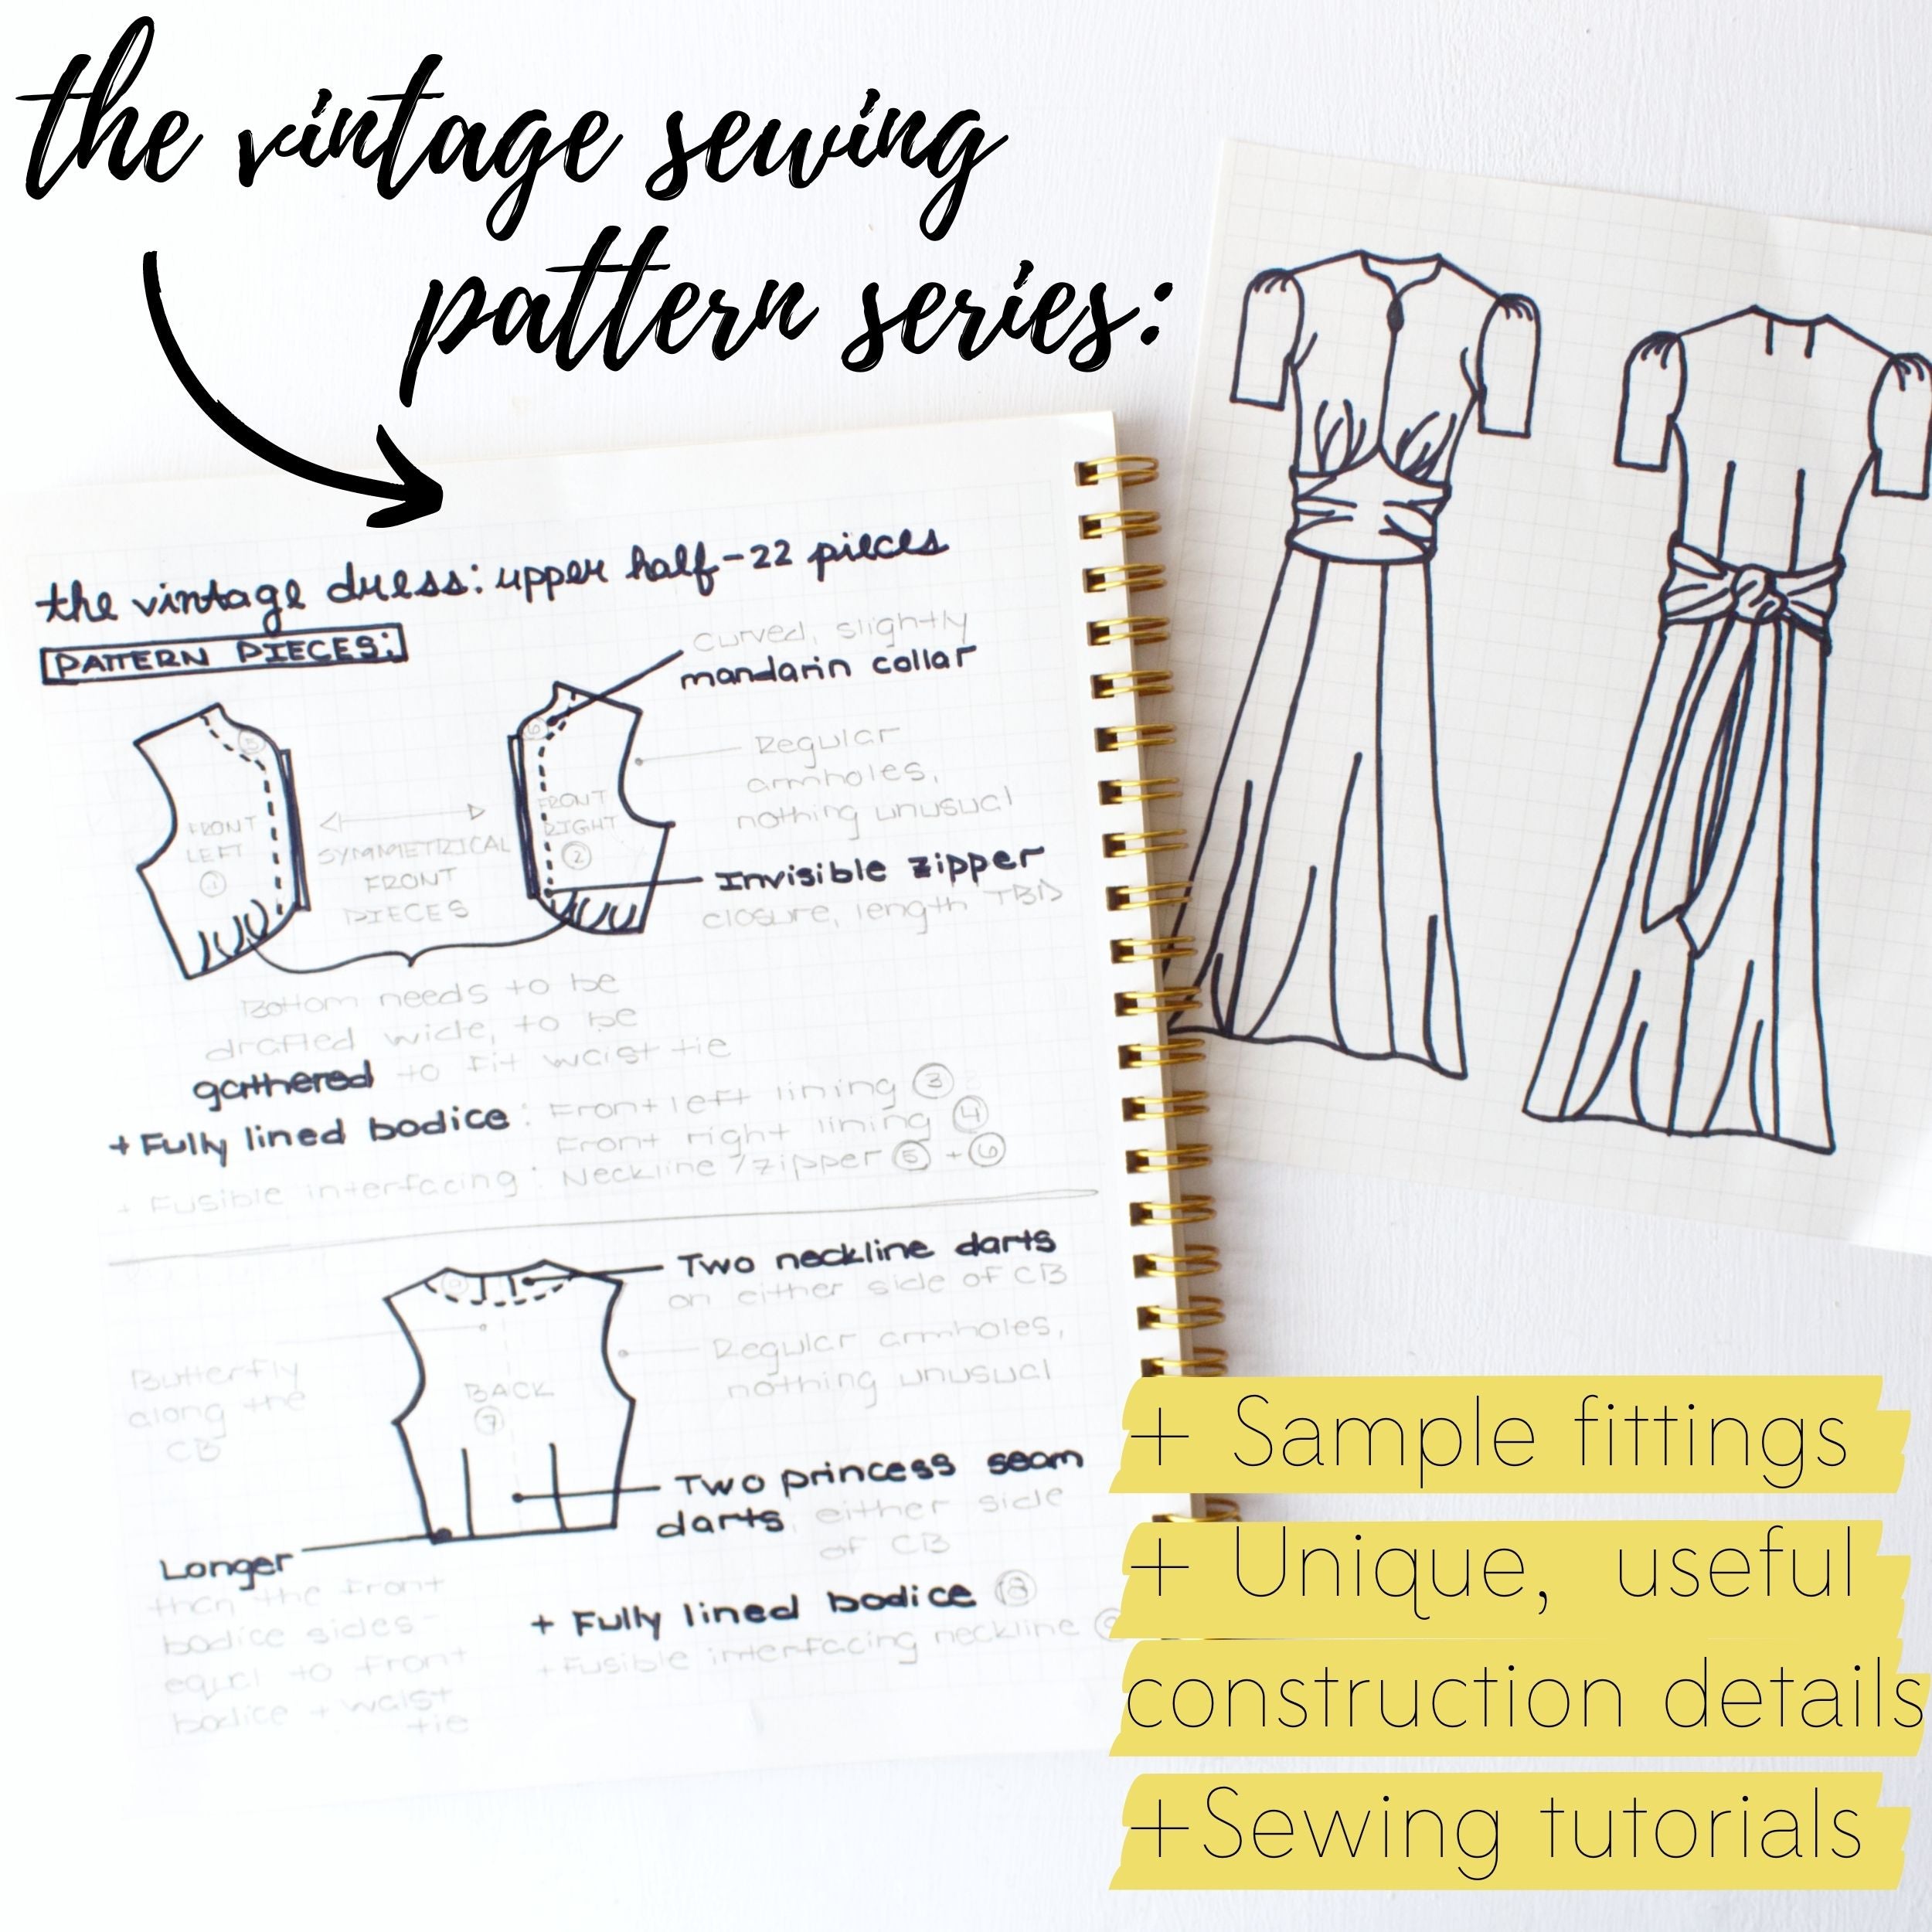 What is the vintage sewing pattern series? 